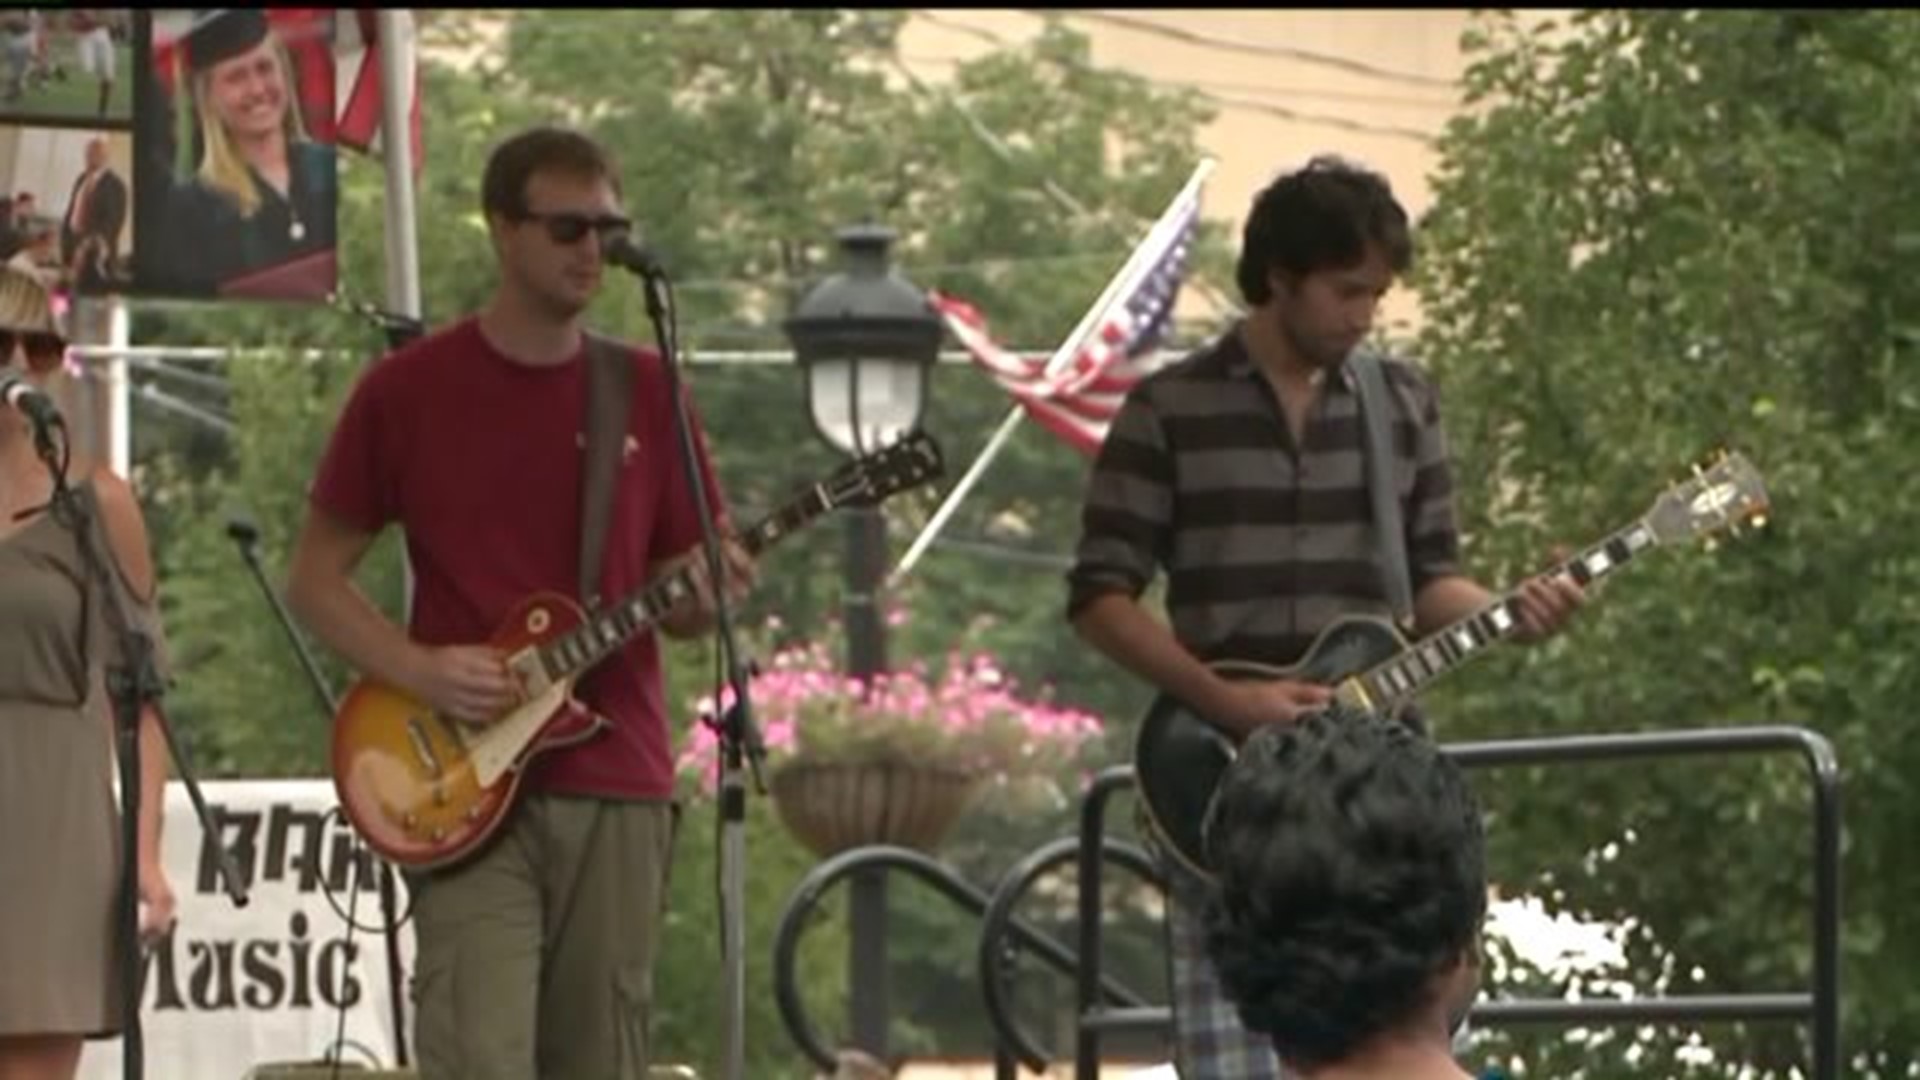 Stroudsburg Announces Summer Concerts in the Park